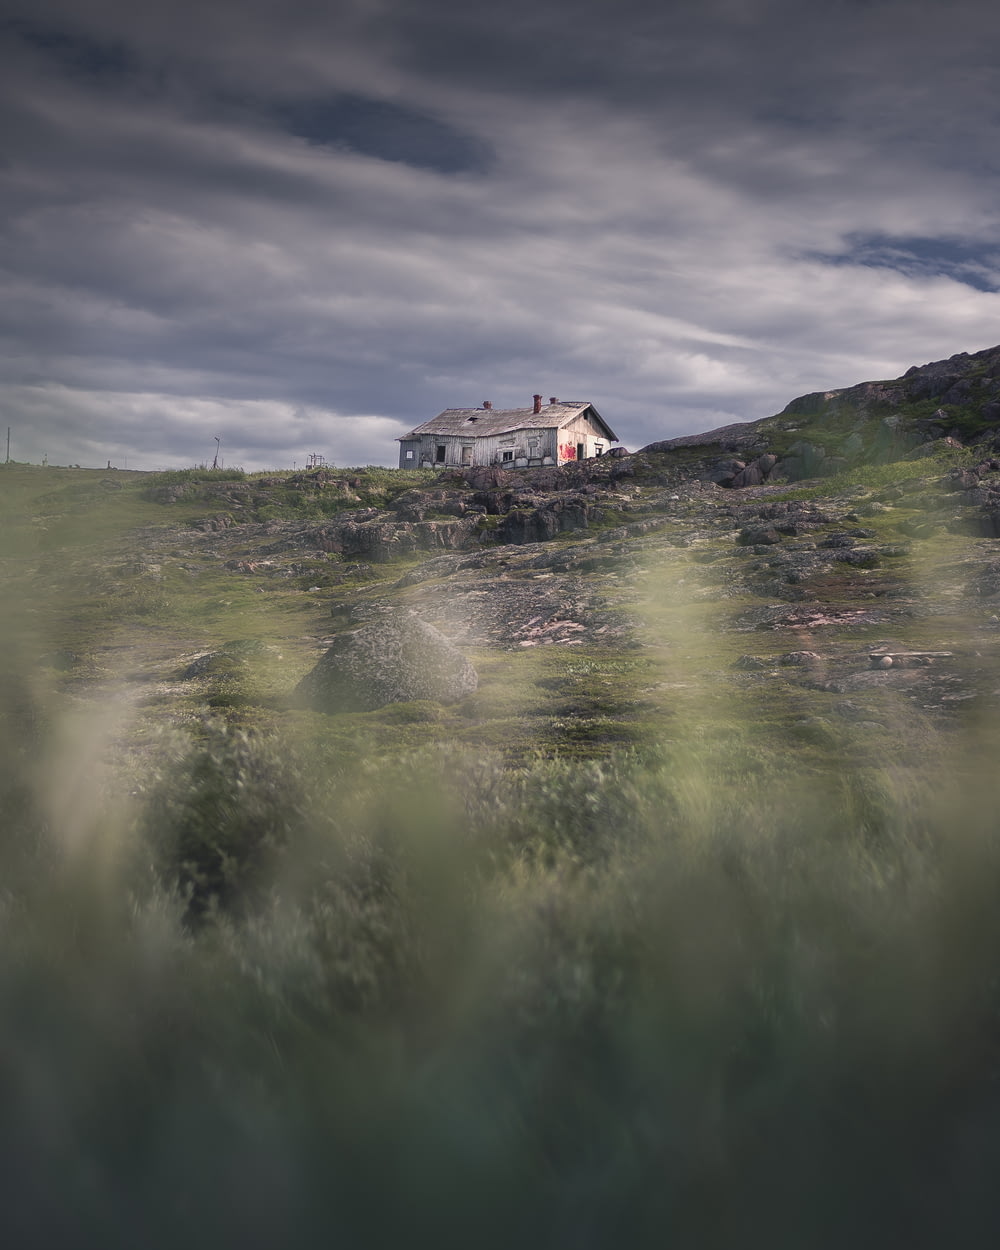 a house sitting on top of a hill under a cloudy sky